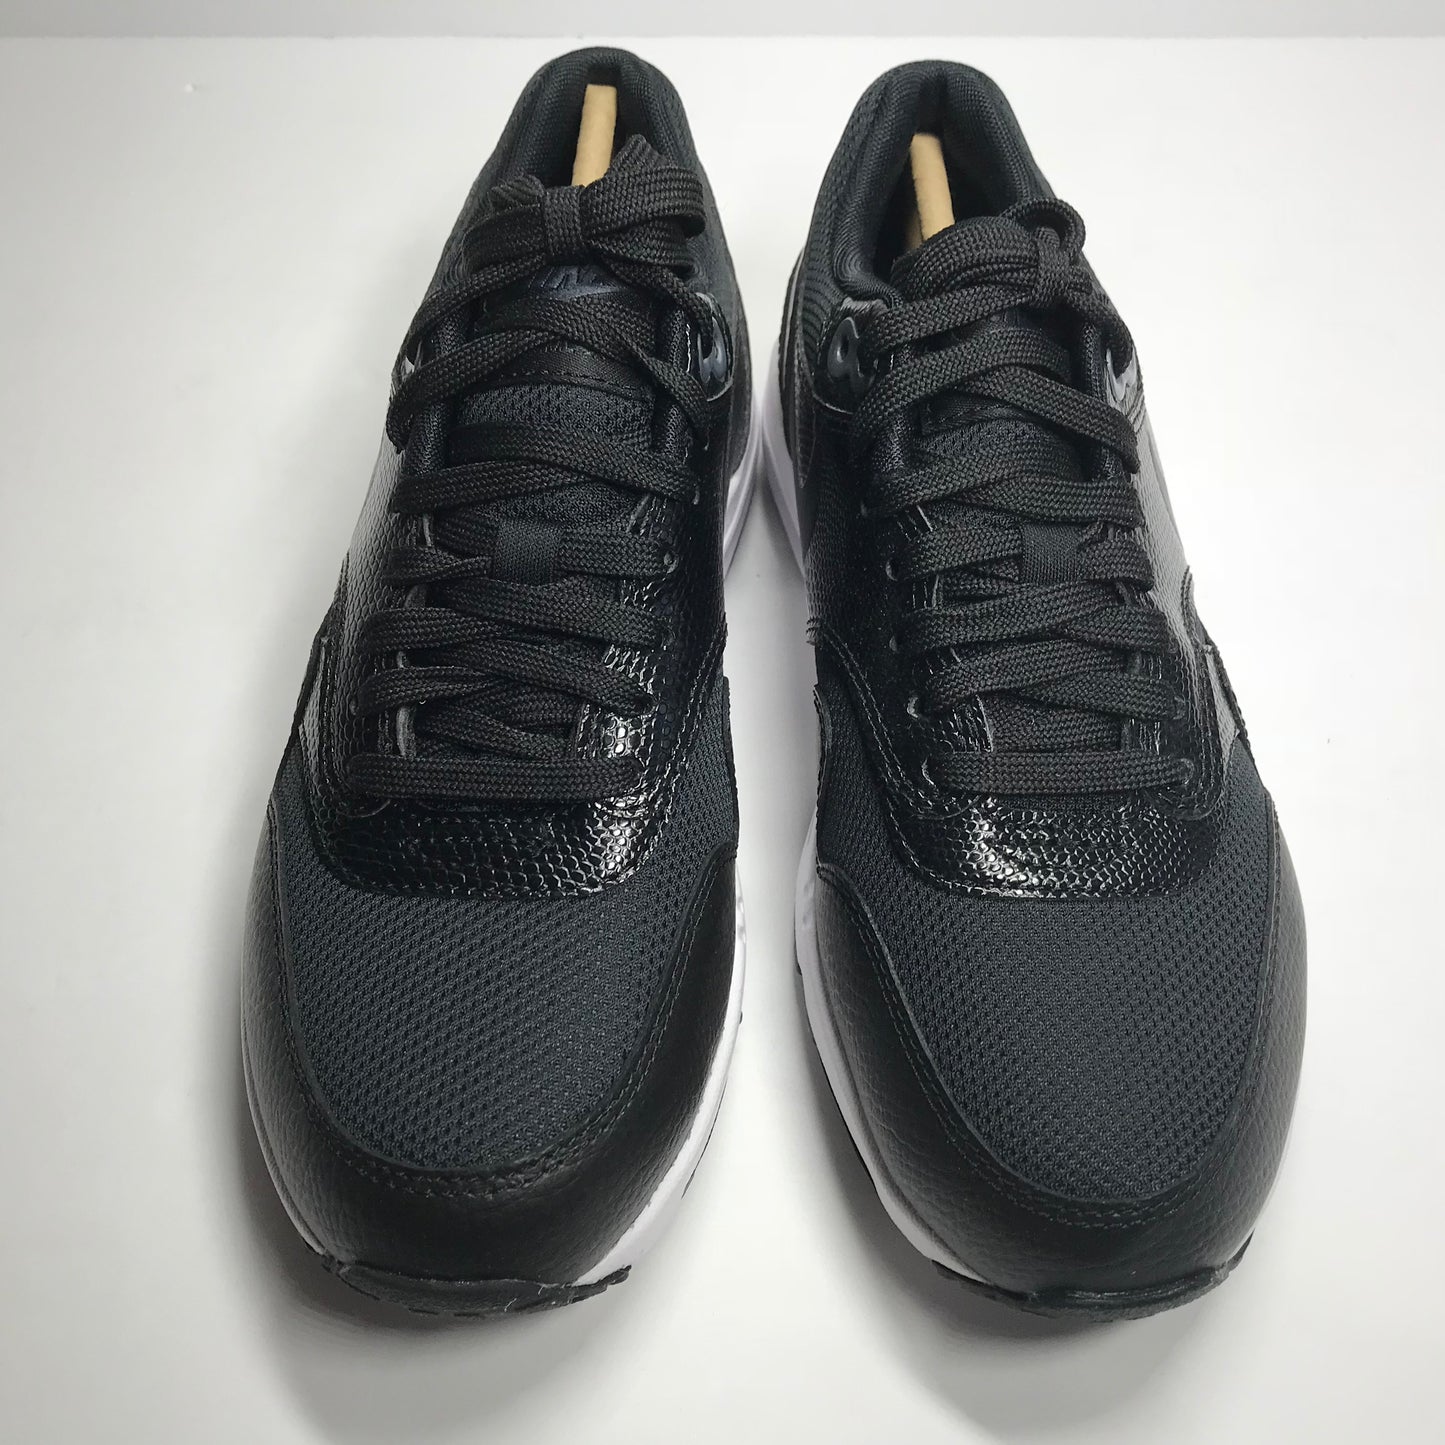 DS Women's Nike Air Max 1 Ultra 2.0 Black/White Size 5